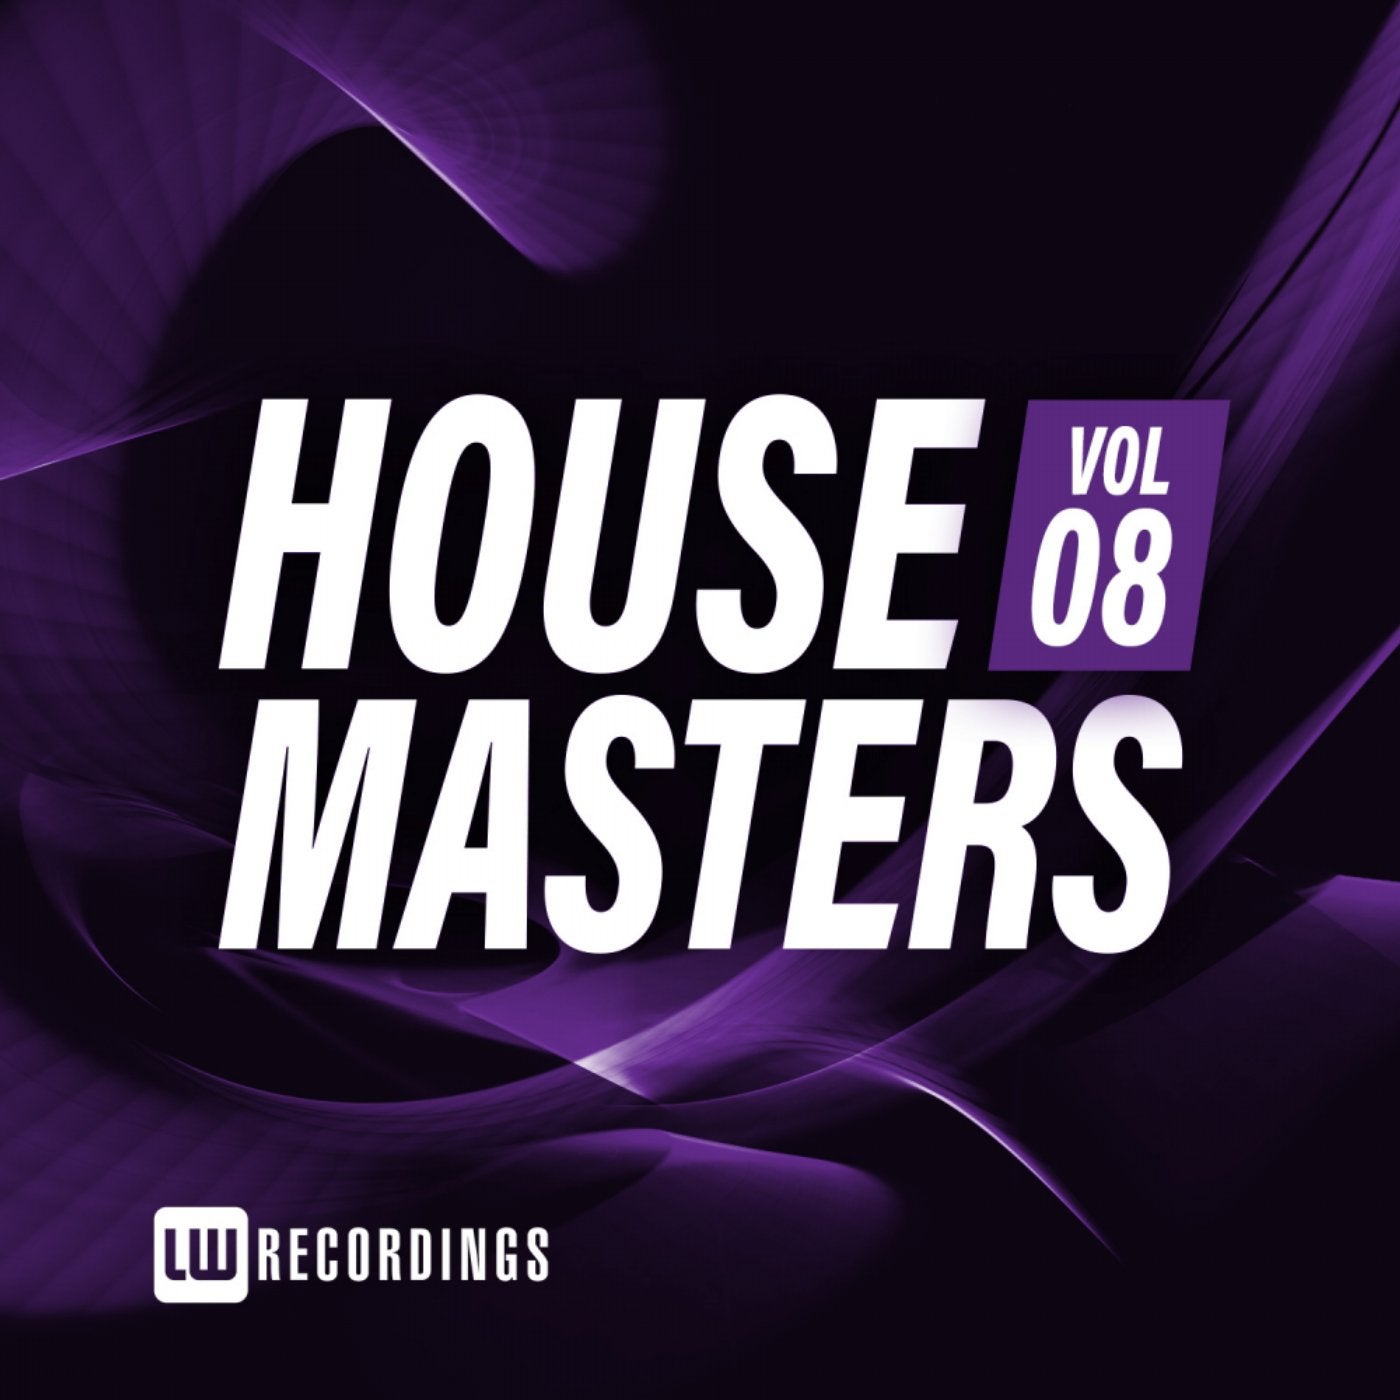 House Masters, Vol. 08